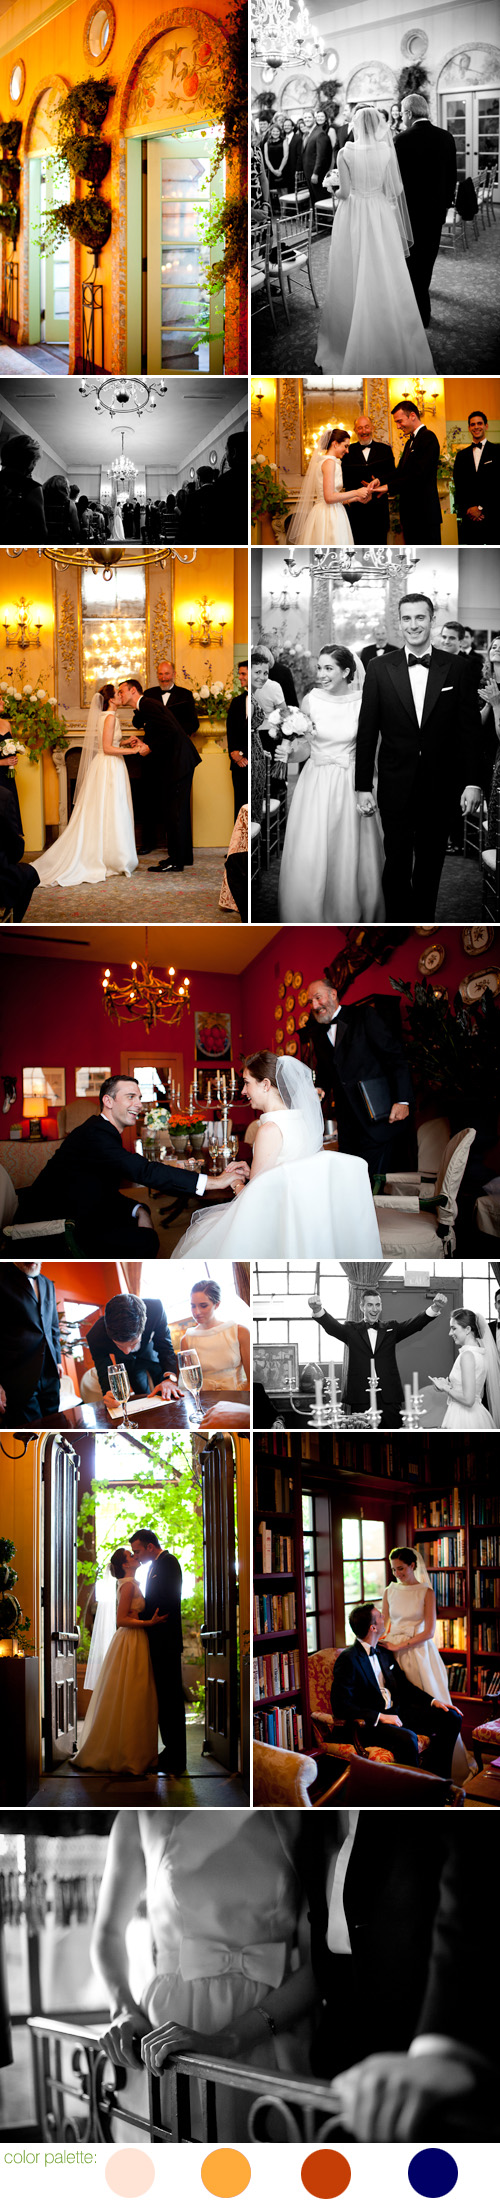 Wedding at The Ruins, photos by La Vie Photography